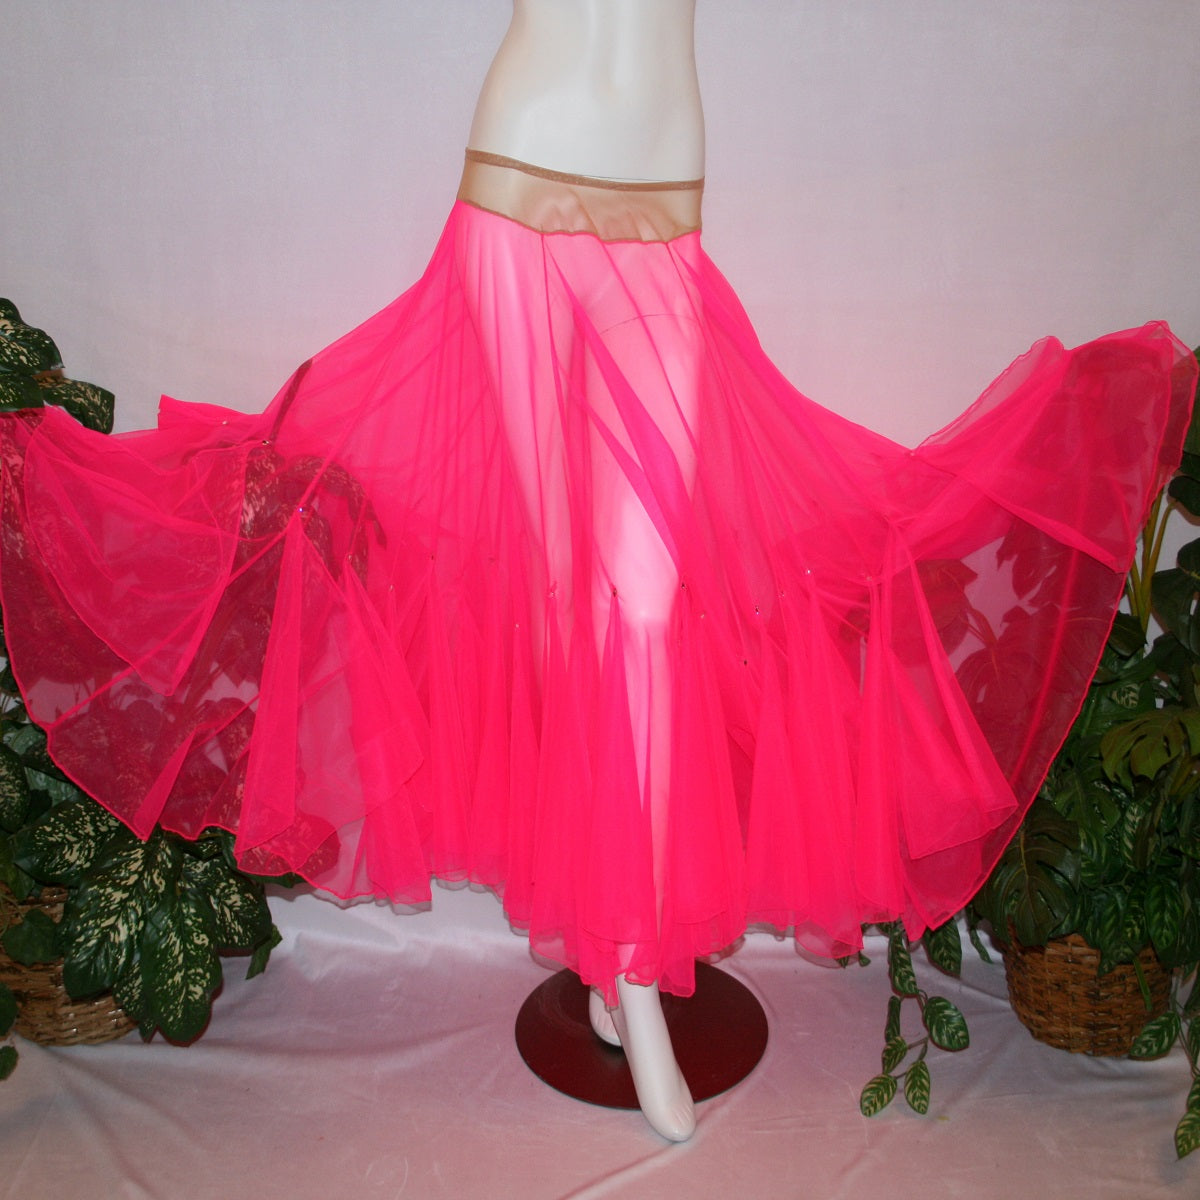 flaired view of Hot pink ballroom skirt created with yards of hot pink sheer tricot with petal like floats around bottom embellished with tear drop Swarovski rhinestones.